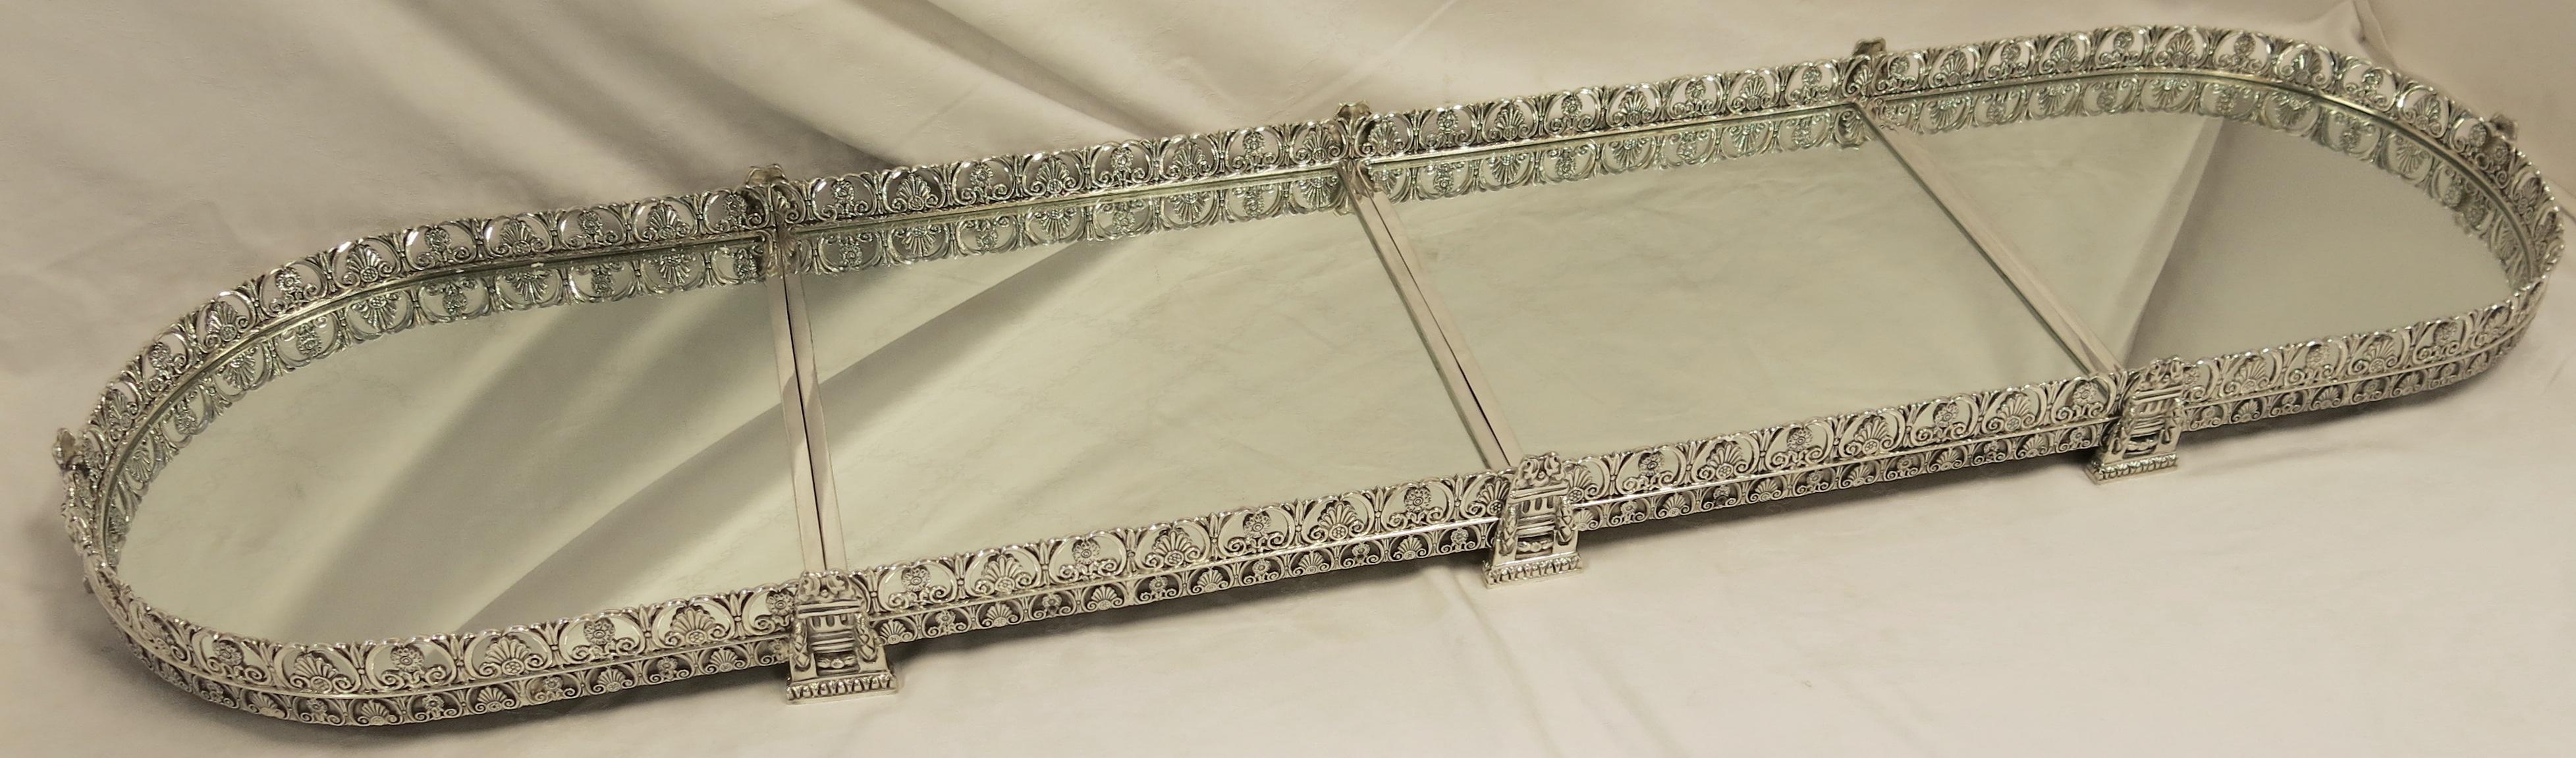 A highly decorative, neoclassical style, four-section silver plated surtout de table or table top plateau. Measures: total of approximately 66